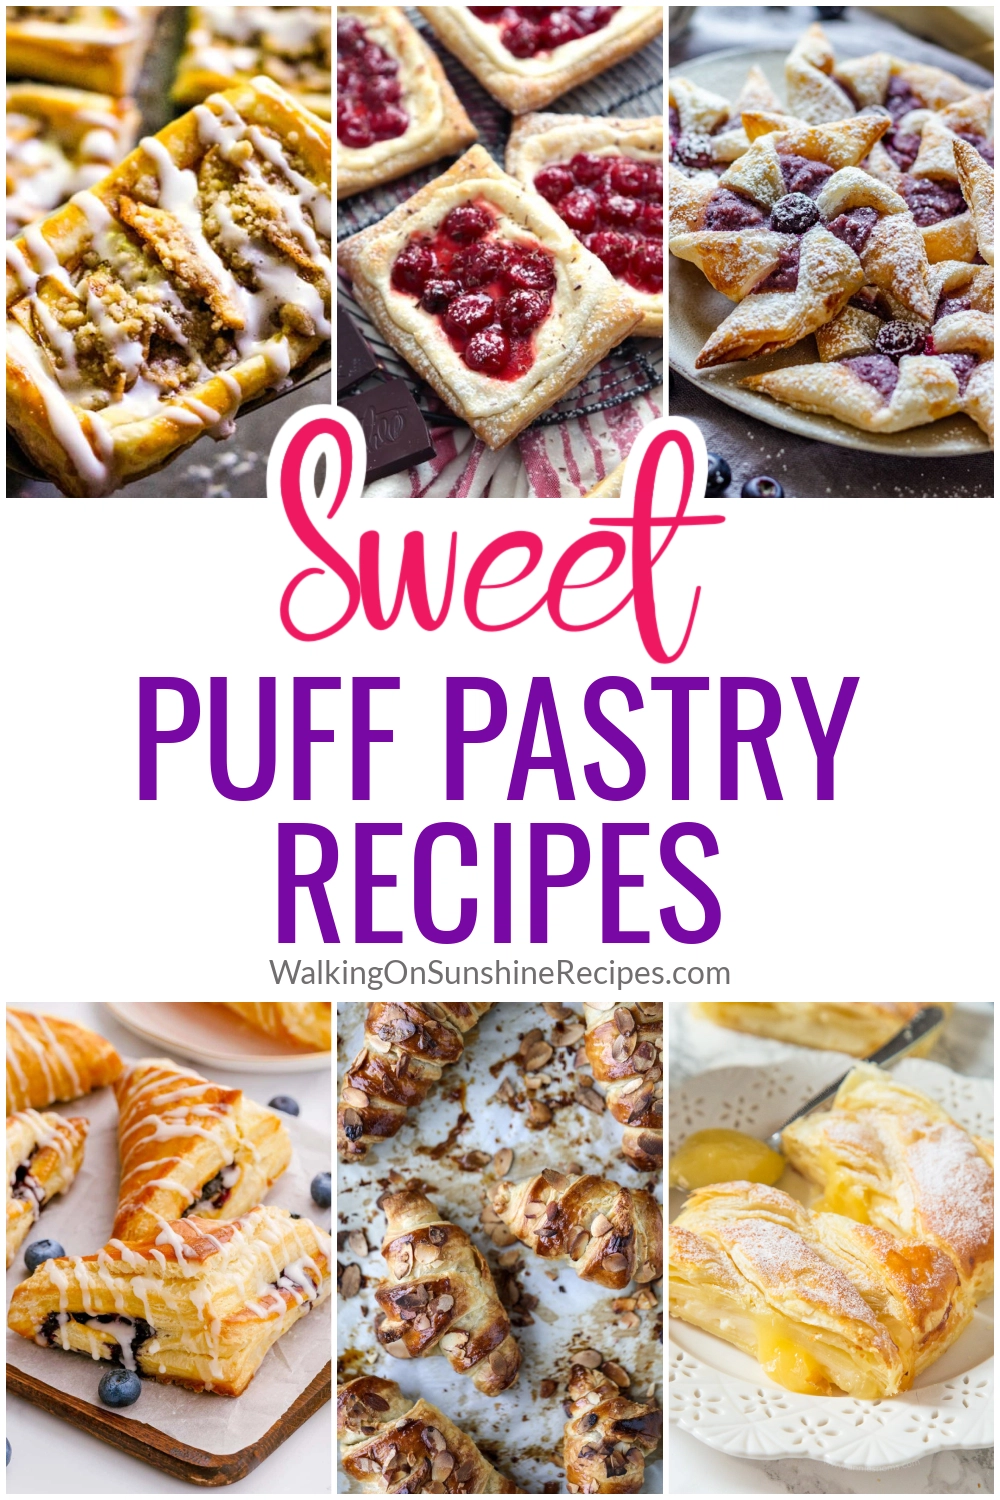 puff pastry ideas sweet.